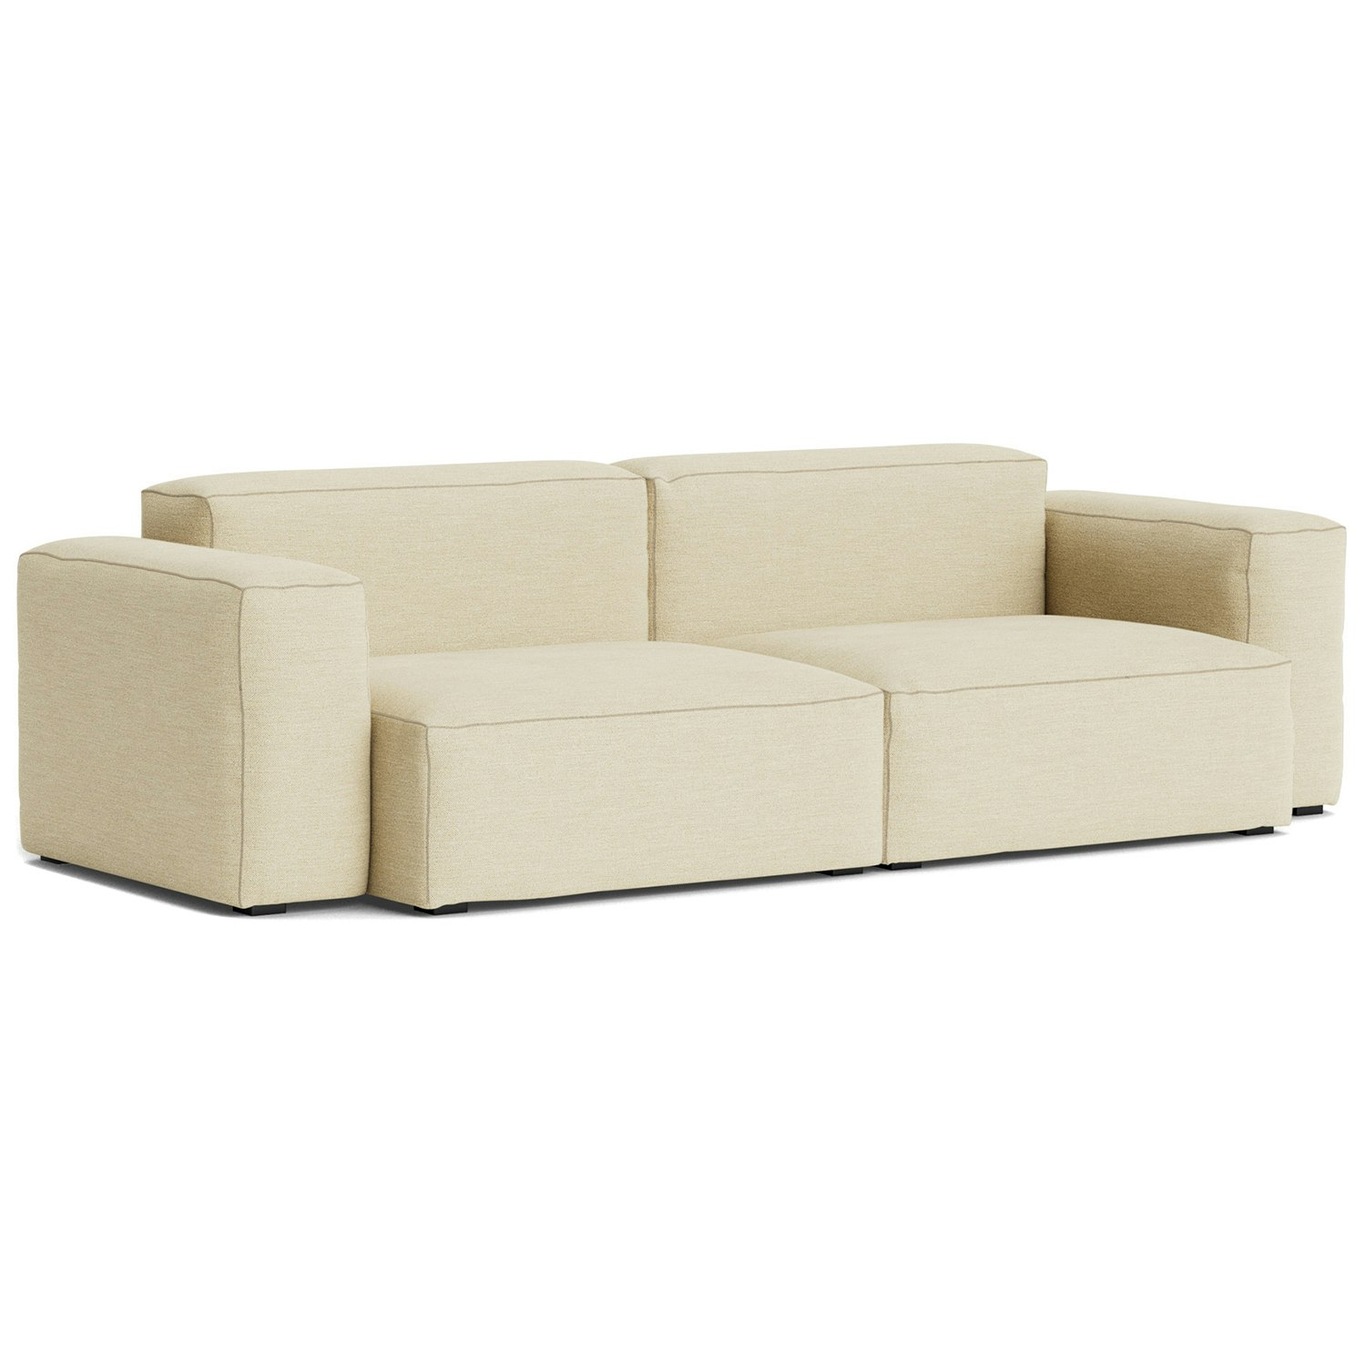 Mags Soft Low 2.5-seater Sofa Comb. 1, Mode 014 / Beige Stitching